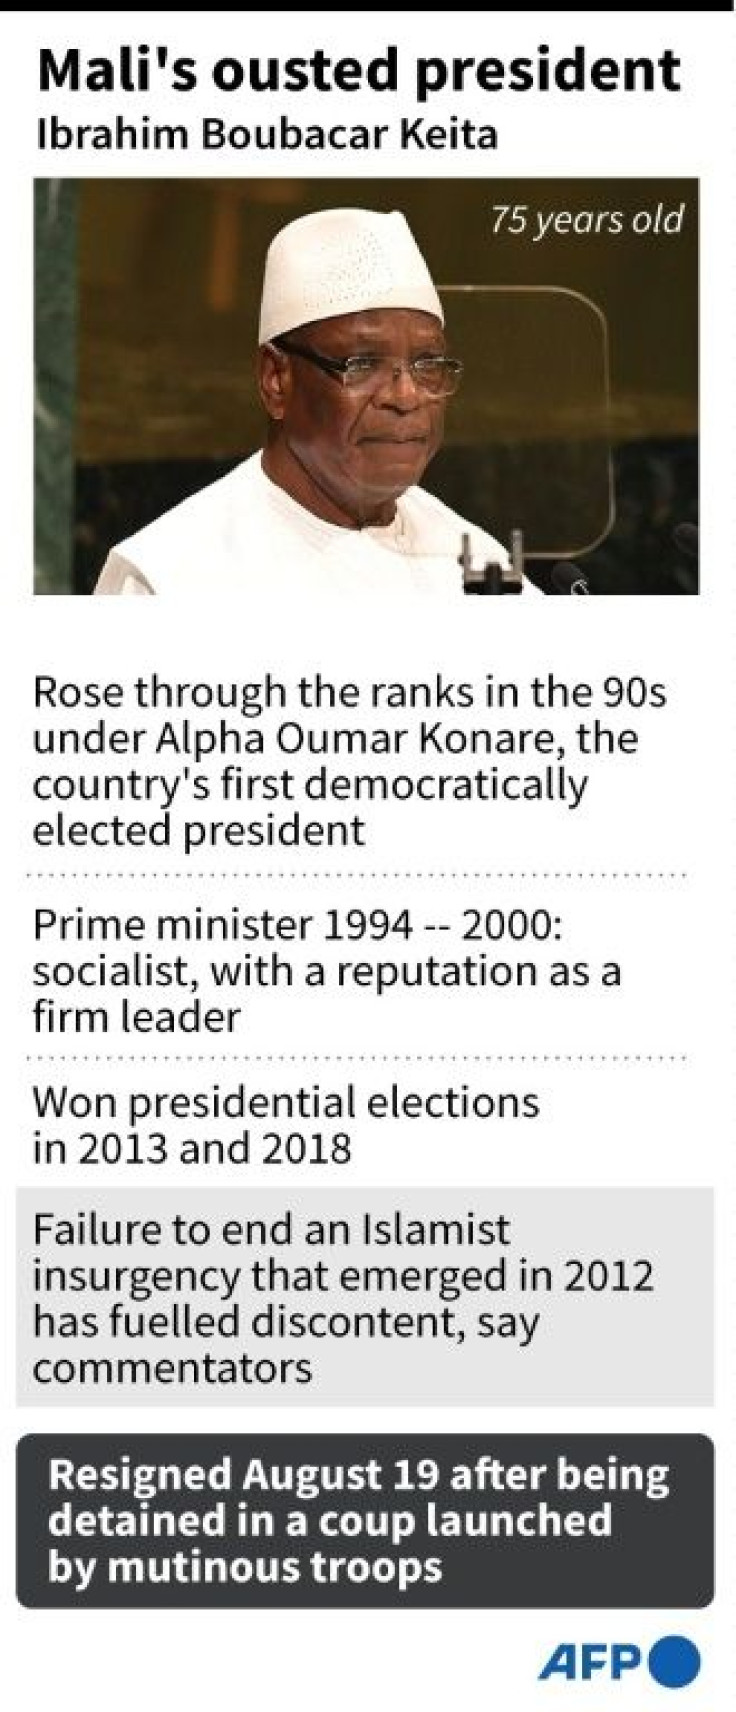 Factfile on Malian President Ibrahim Boubacar Keita who resigned with immediate effect late Tuesday after a military coup.